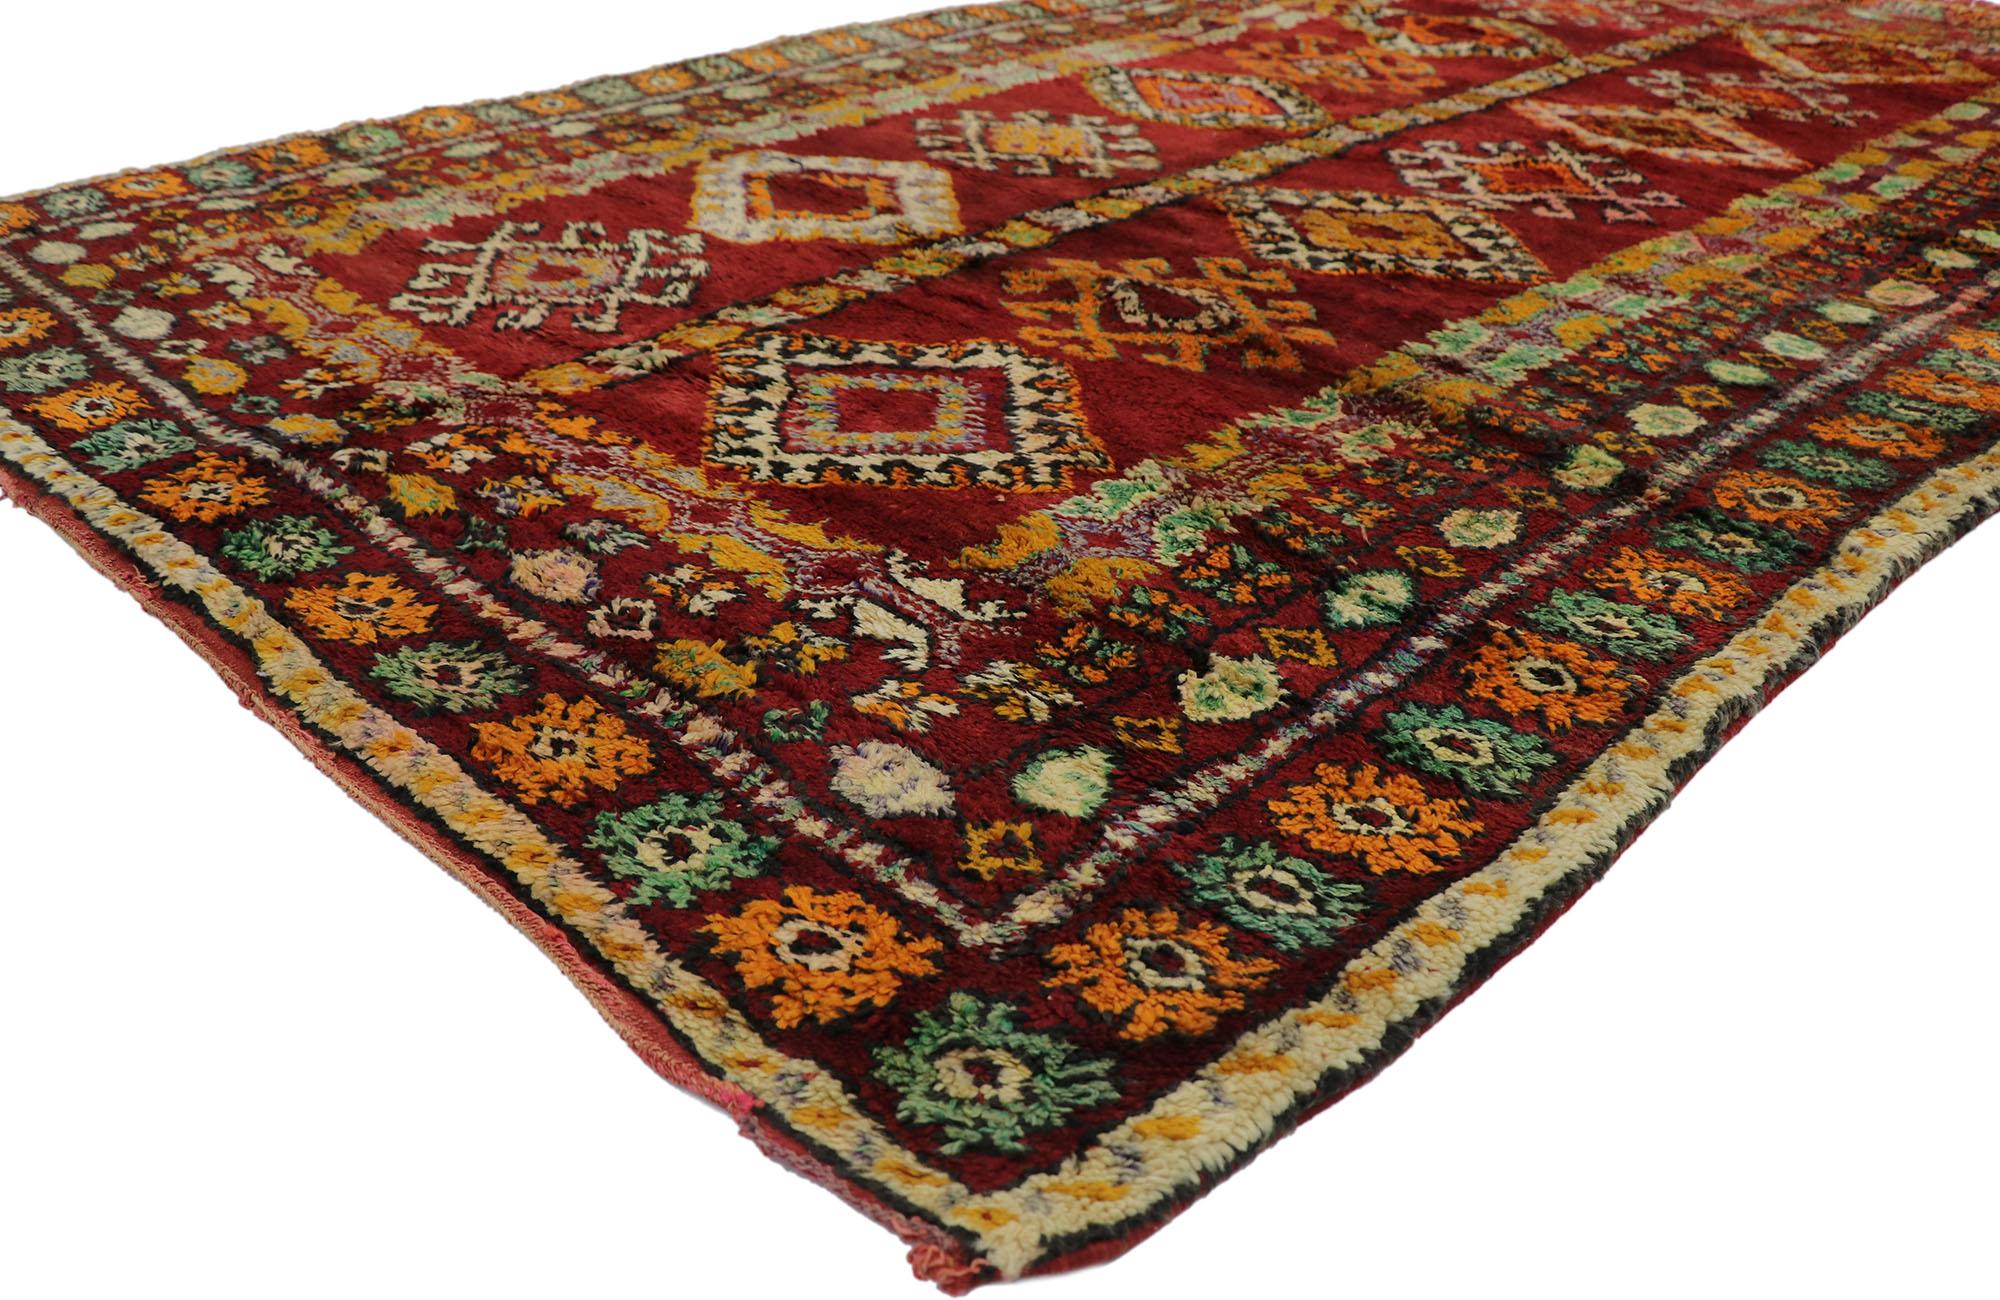 21506 Vintage Beni M'Guild Moroccan rug with tribal style 05'11 x 09'03. Showcasing a bold expressive design, incredible detail and texture, this hand knotted wool vintage Berber Beni M'Guild Moroccan rug is a captivating vision of woven beauty. The